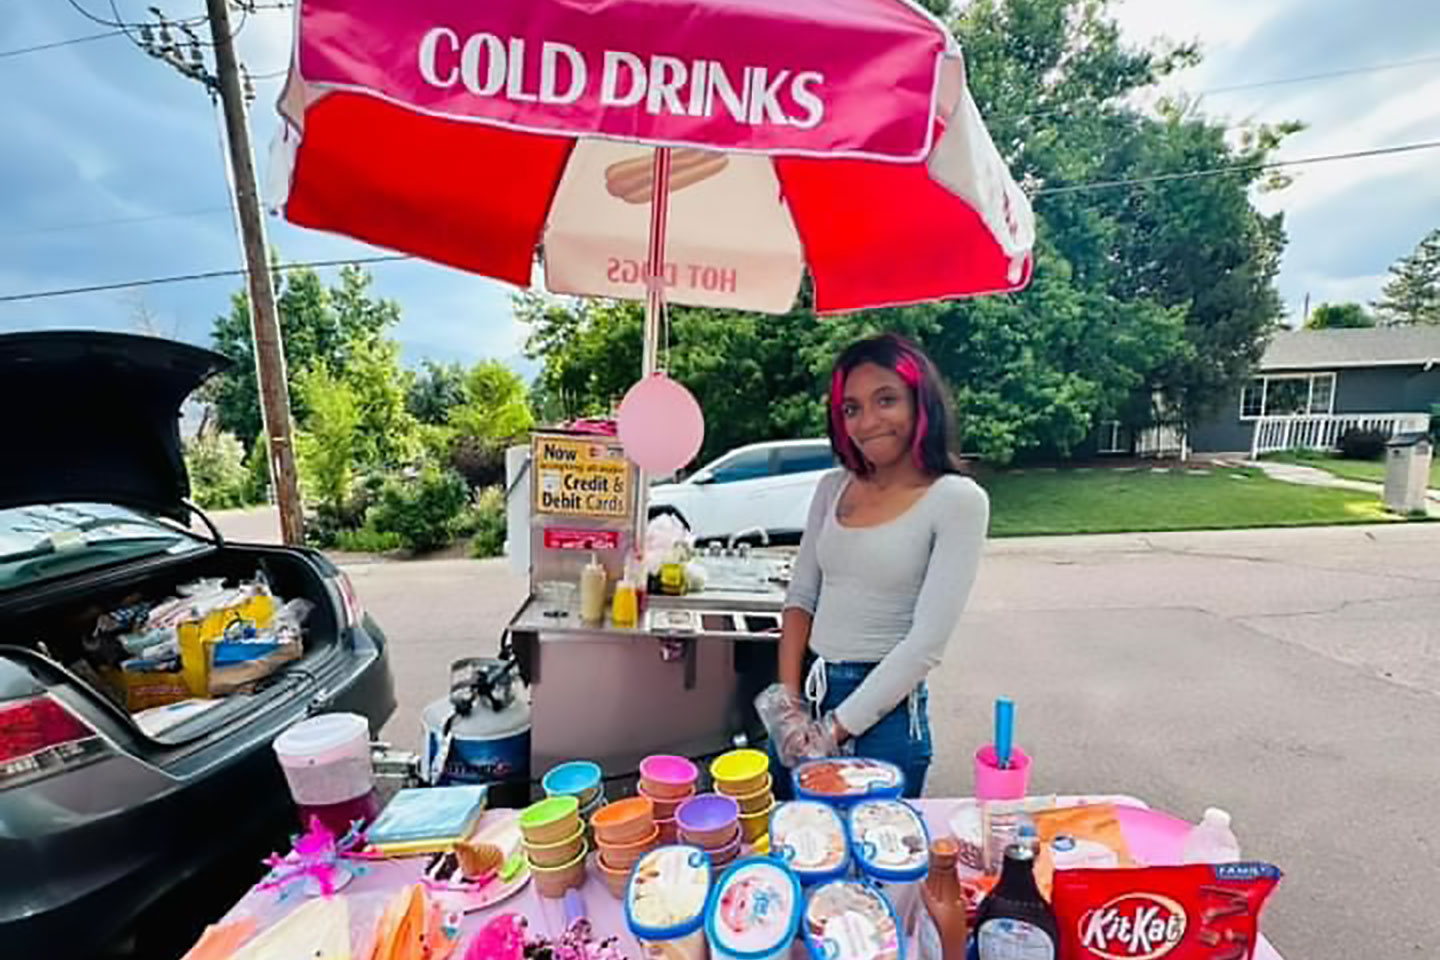 Shay's Snacks is a mobile hotdog and street food. She also caters other foods & holiday meals for parties, corporate, etc. She is a young mother of two children.
https://www.facebook.com/profile.php?id=100091515900216